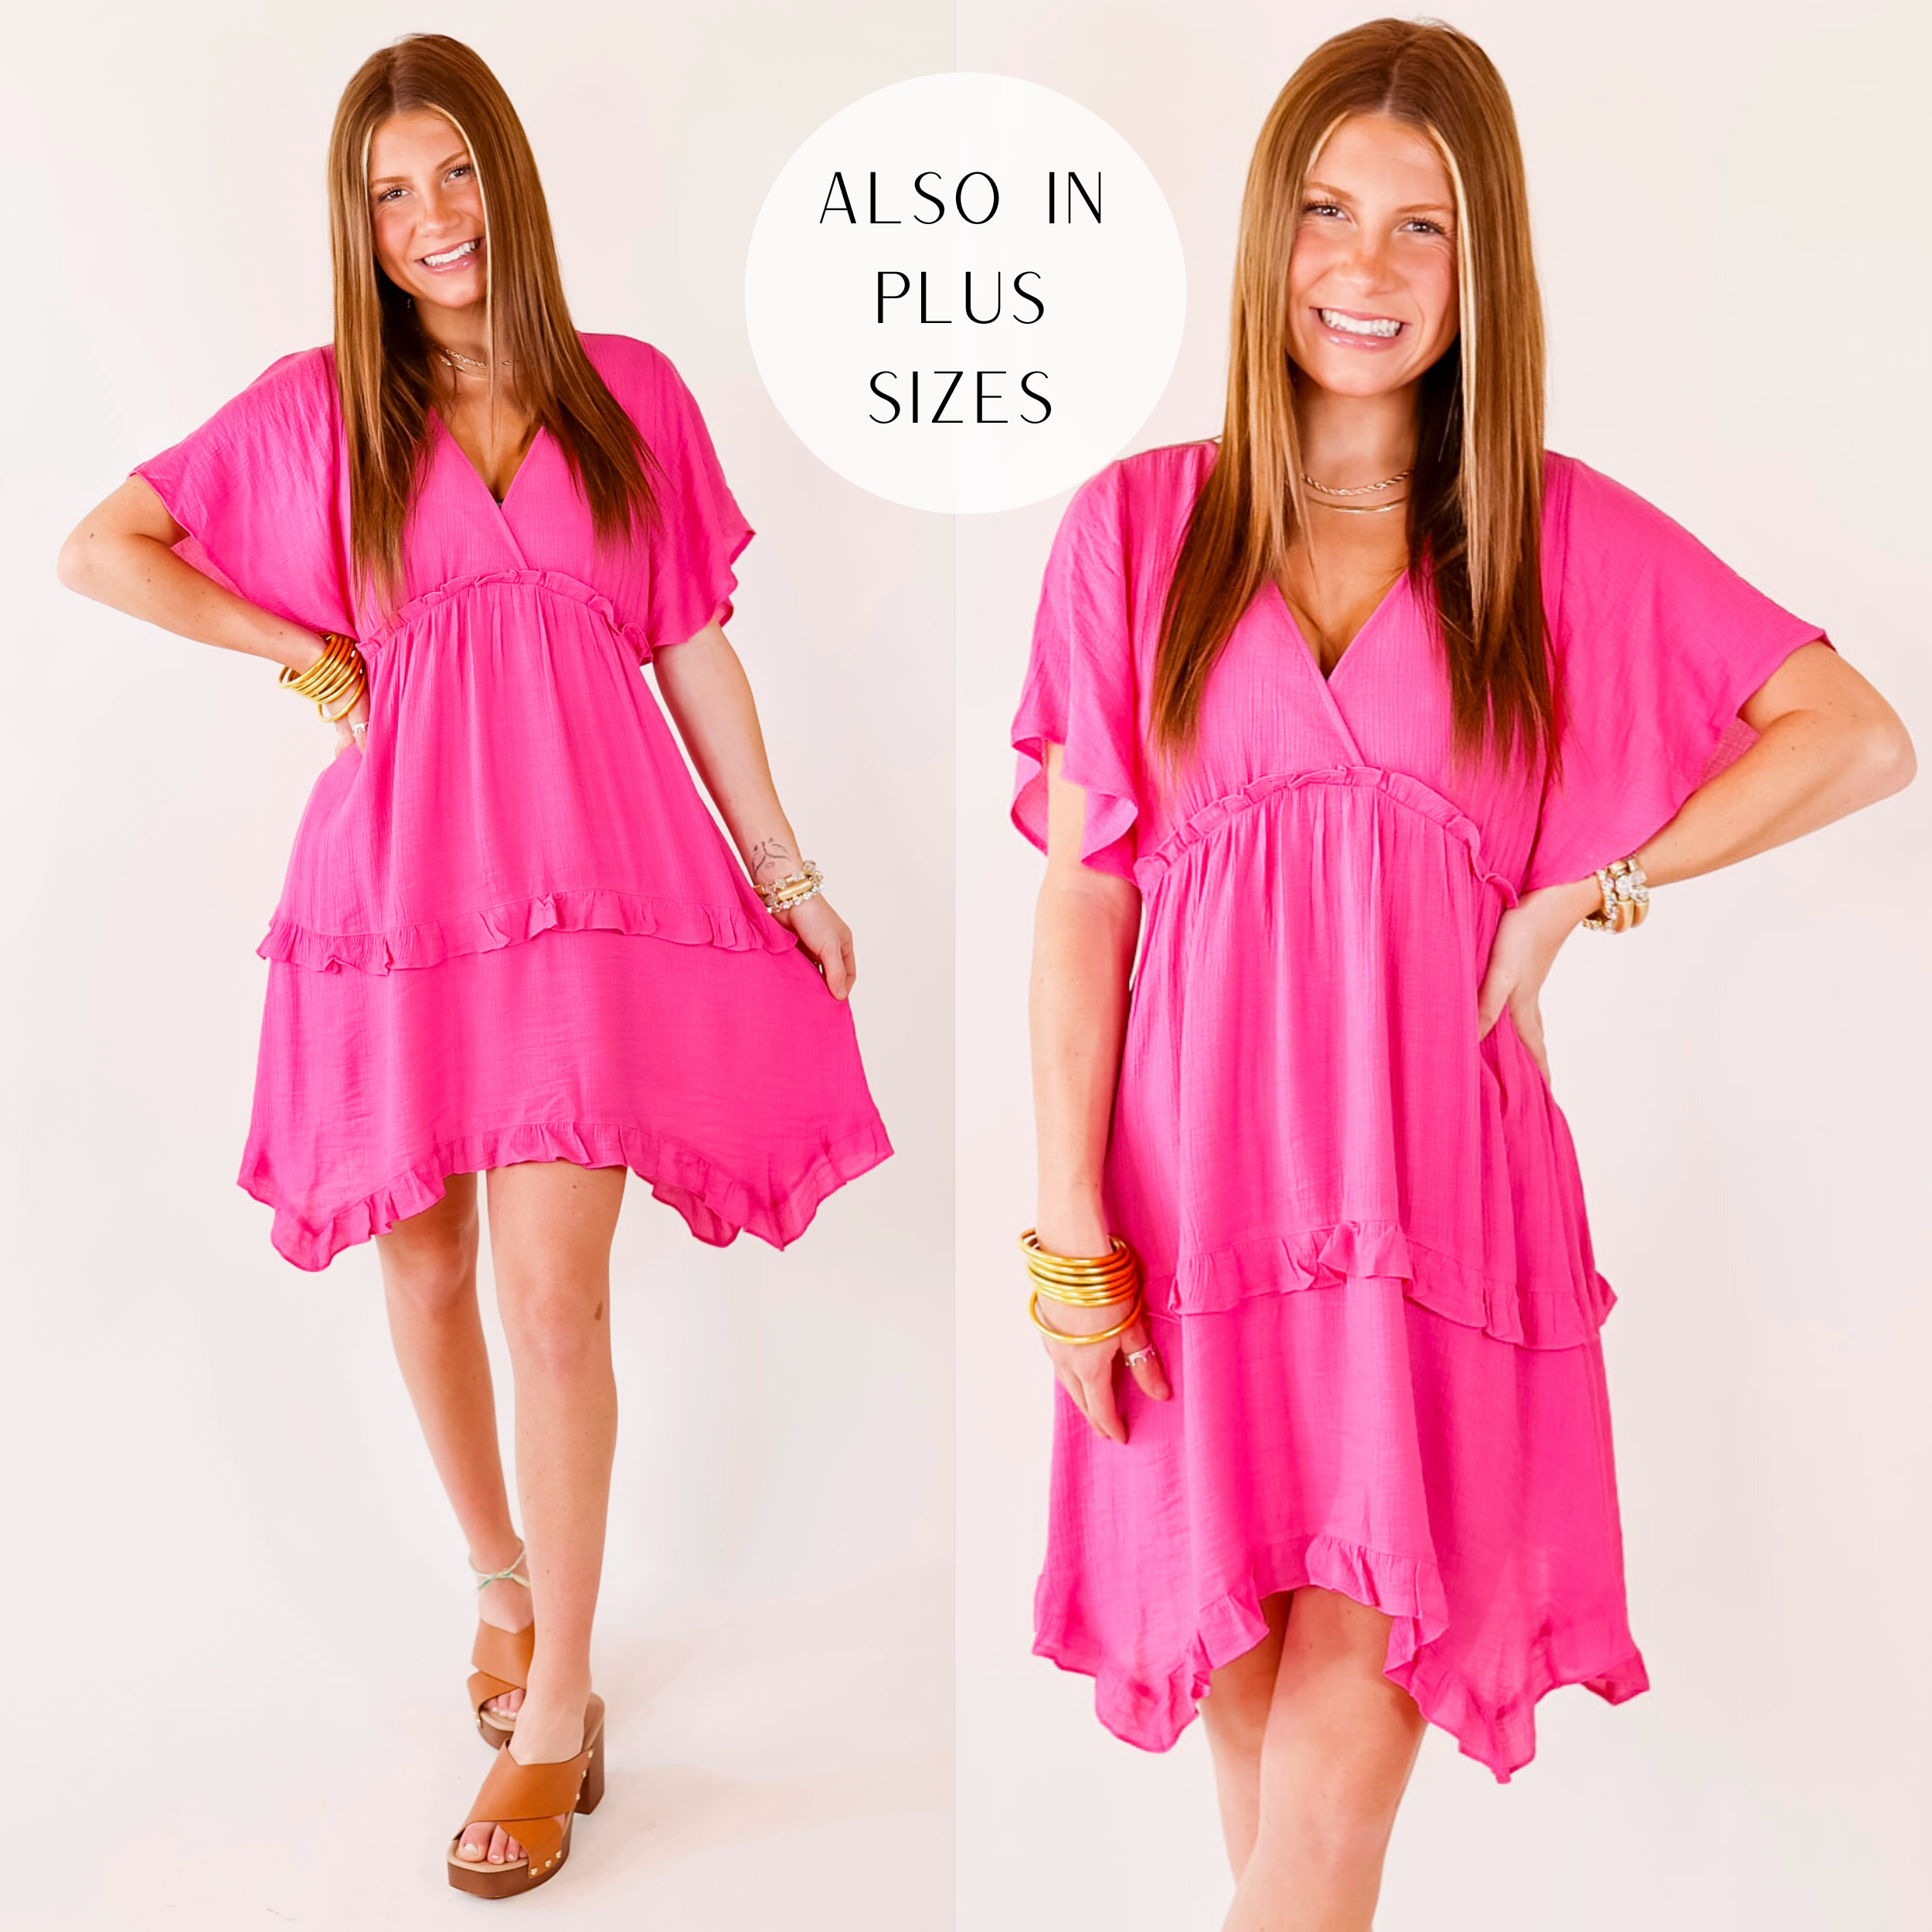 Model is wearing a v neck, ruffle tiered dress in pink.